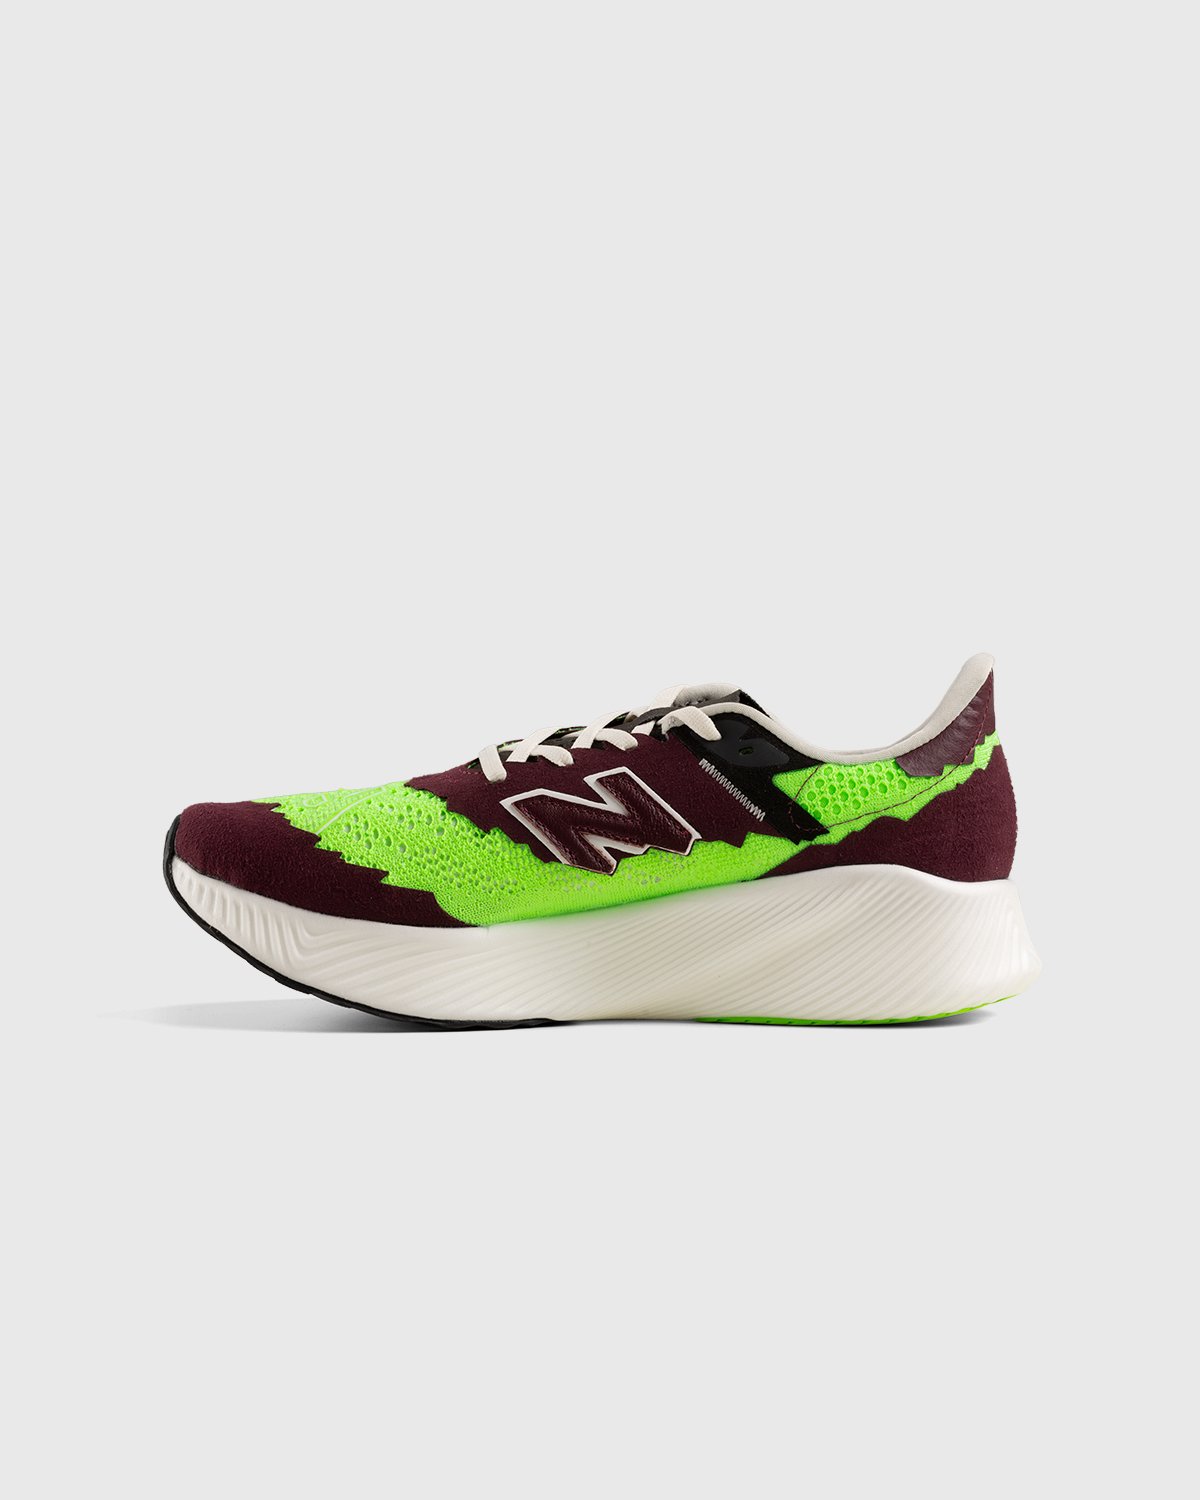 New Balance x Stone Island - FuelCell RC Elite v2 Energy Lime - Footwear - Green - Image 2